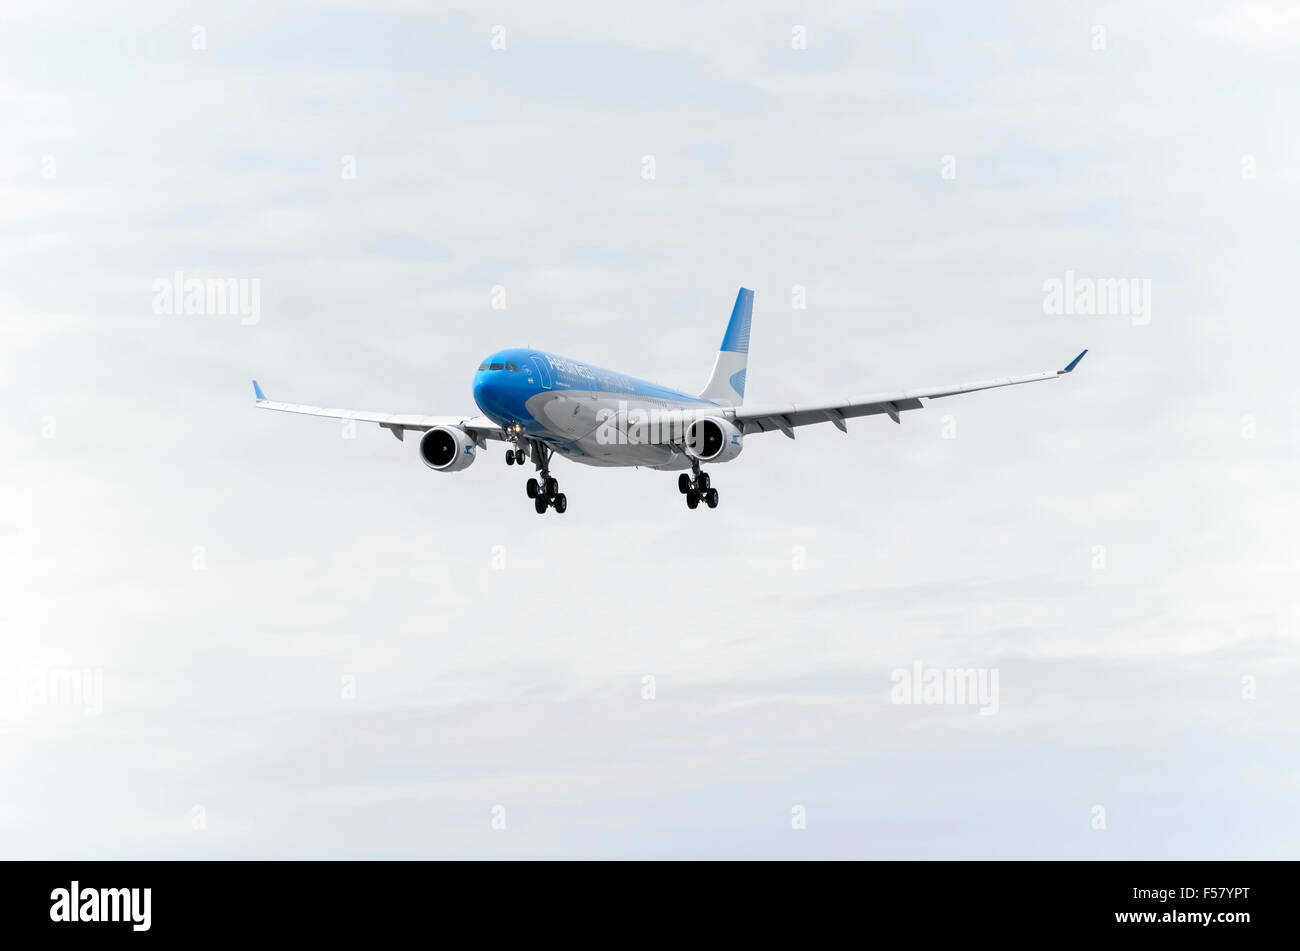 Aircraft -Airbus A330-202-, of -Aerolineas Argentinas- airline, is landing on Madrid-Barajas -Adolfo Suarez- airport Stock Photo